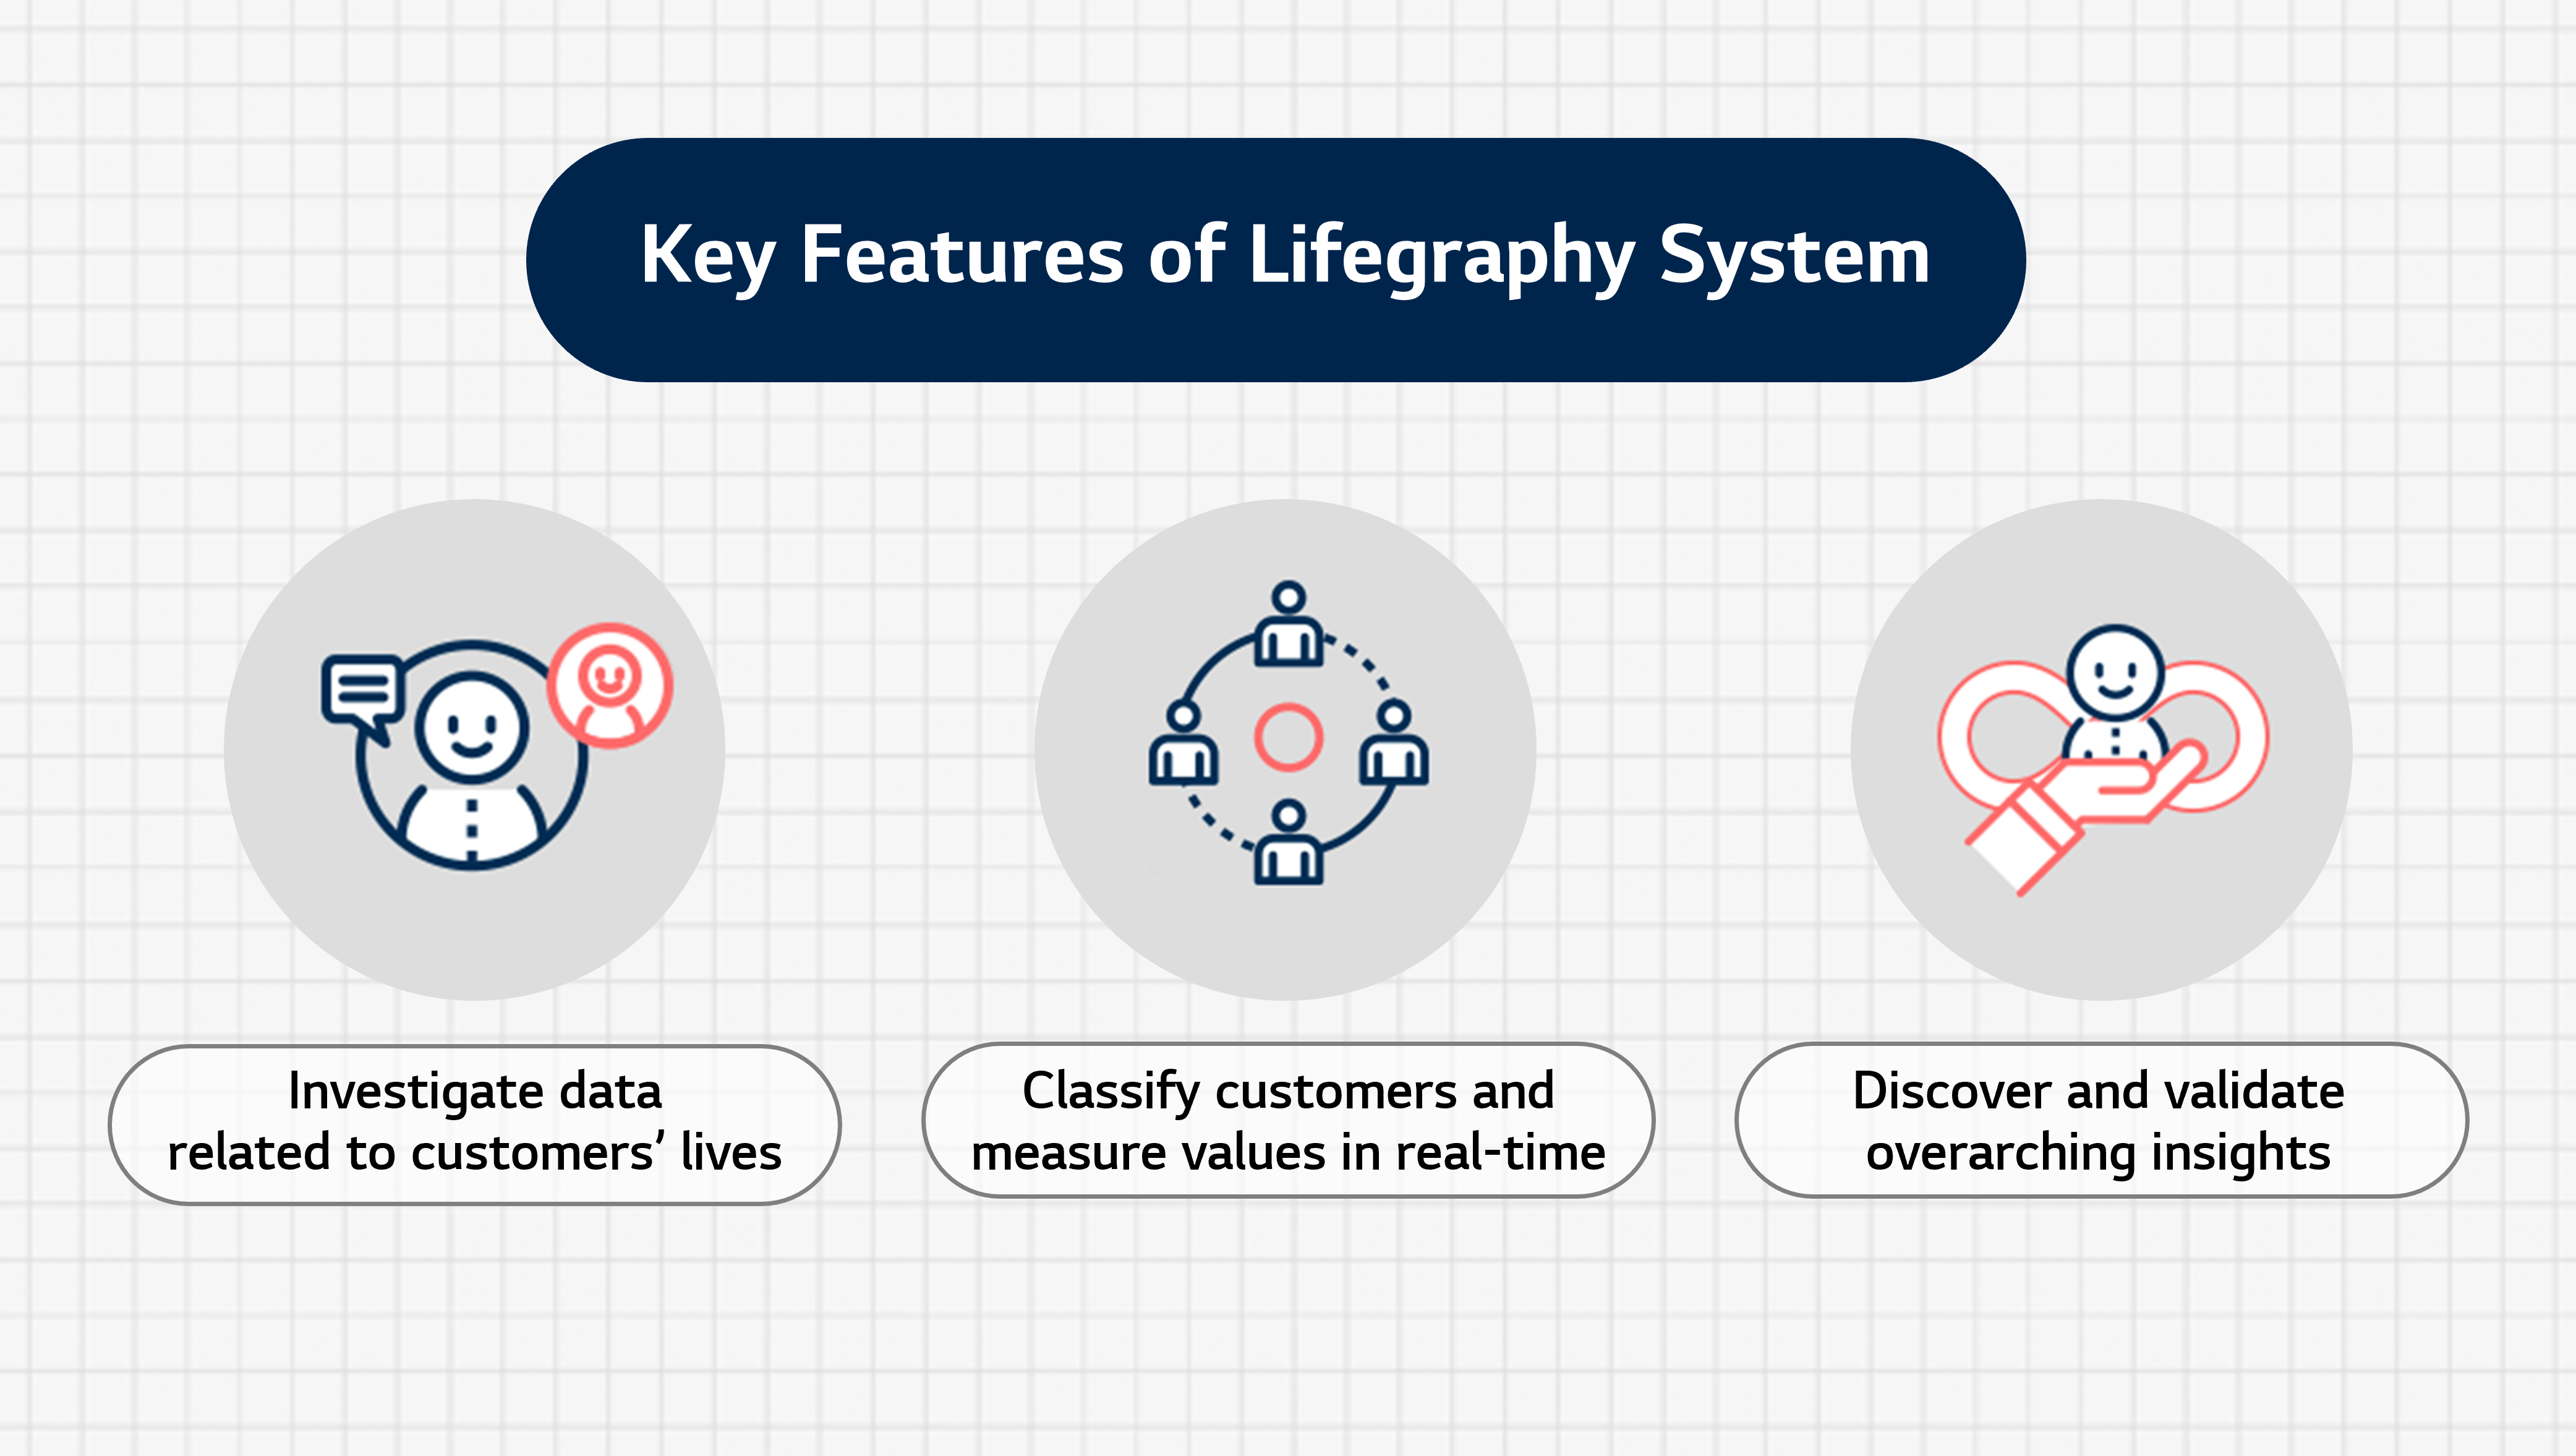 Three Key Features of Lifegraphy system